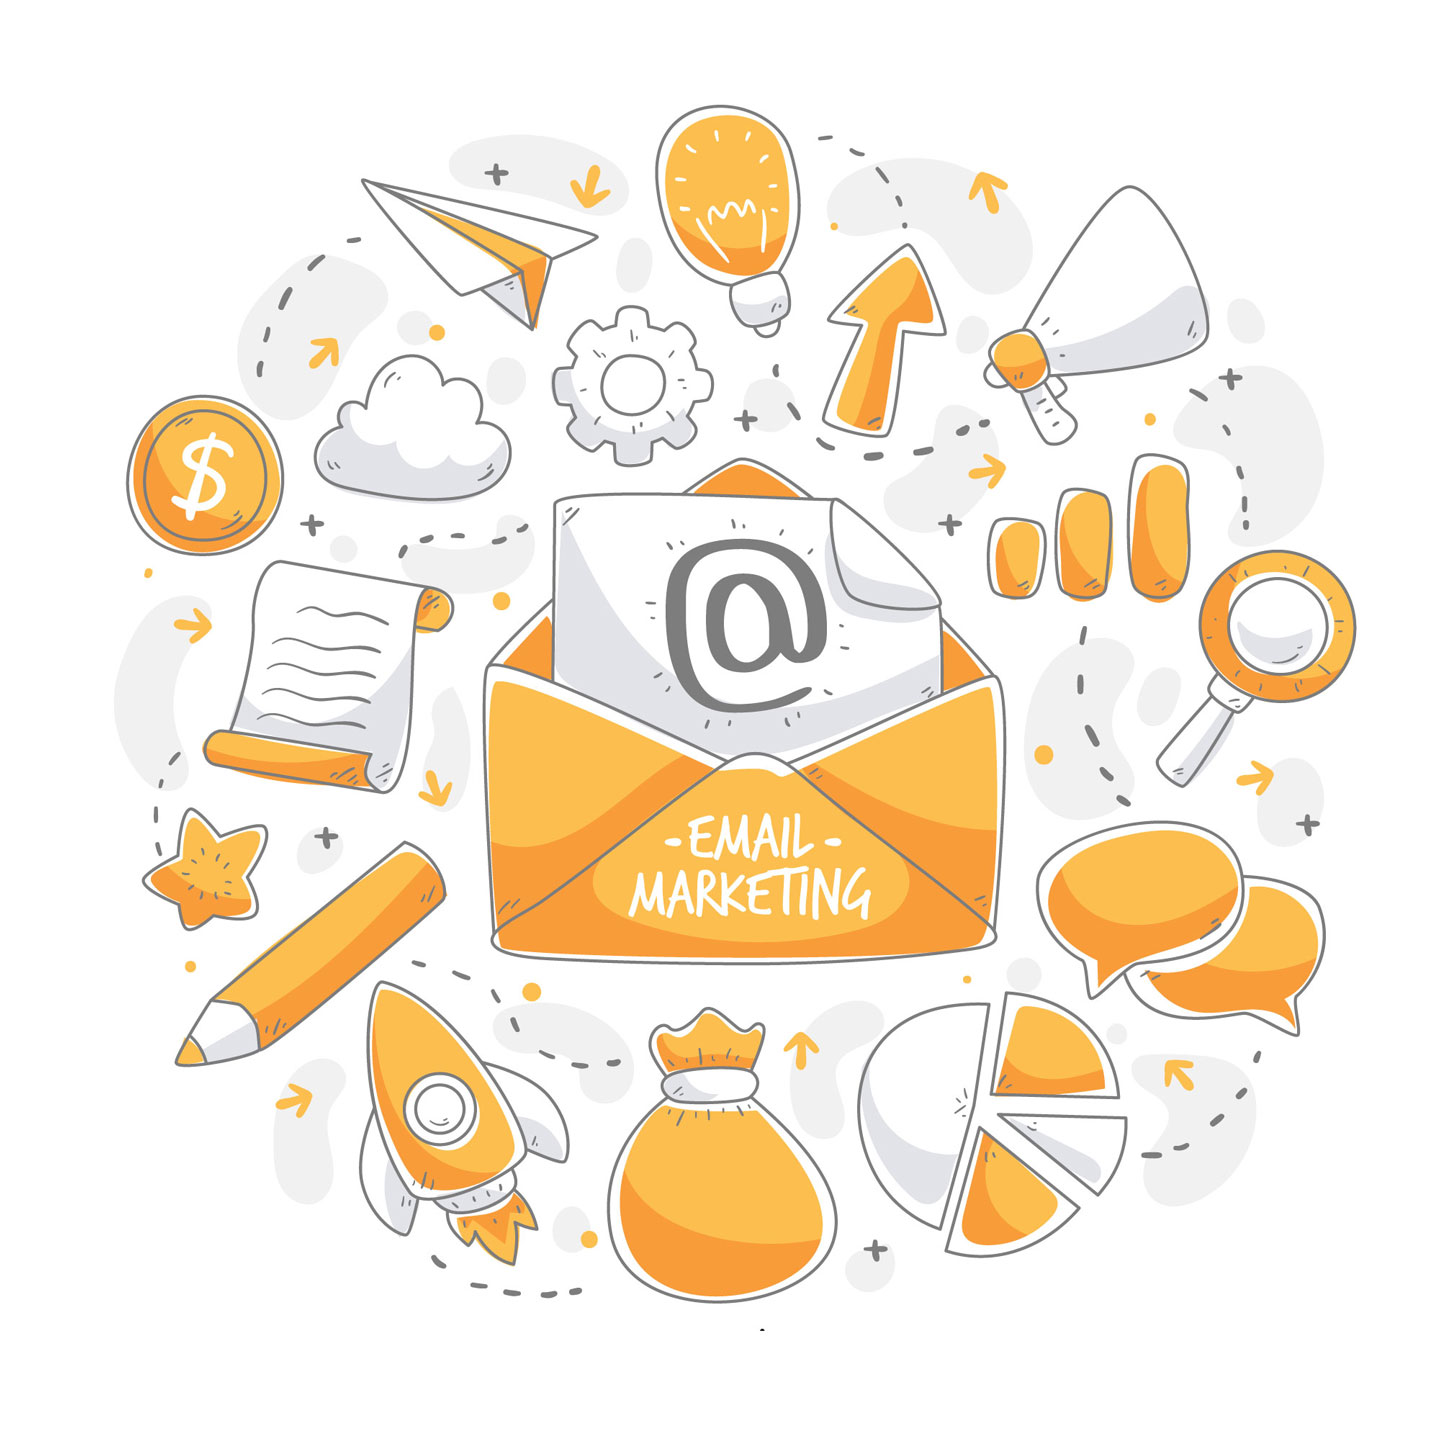 Email marketing design services